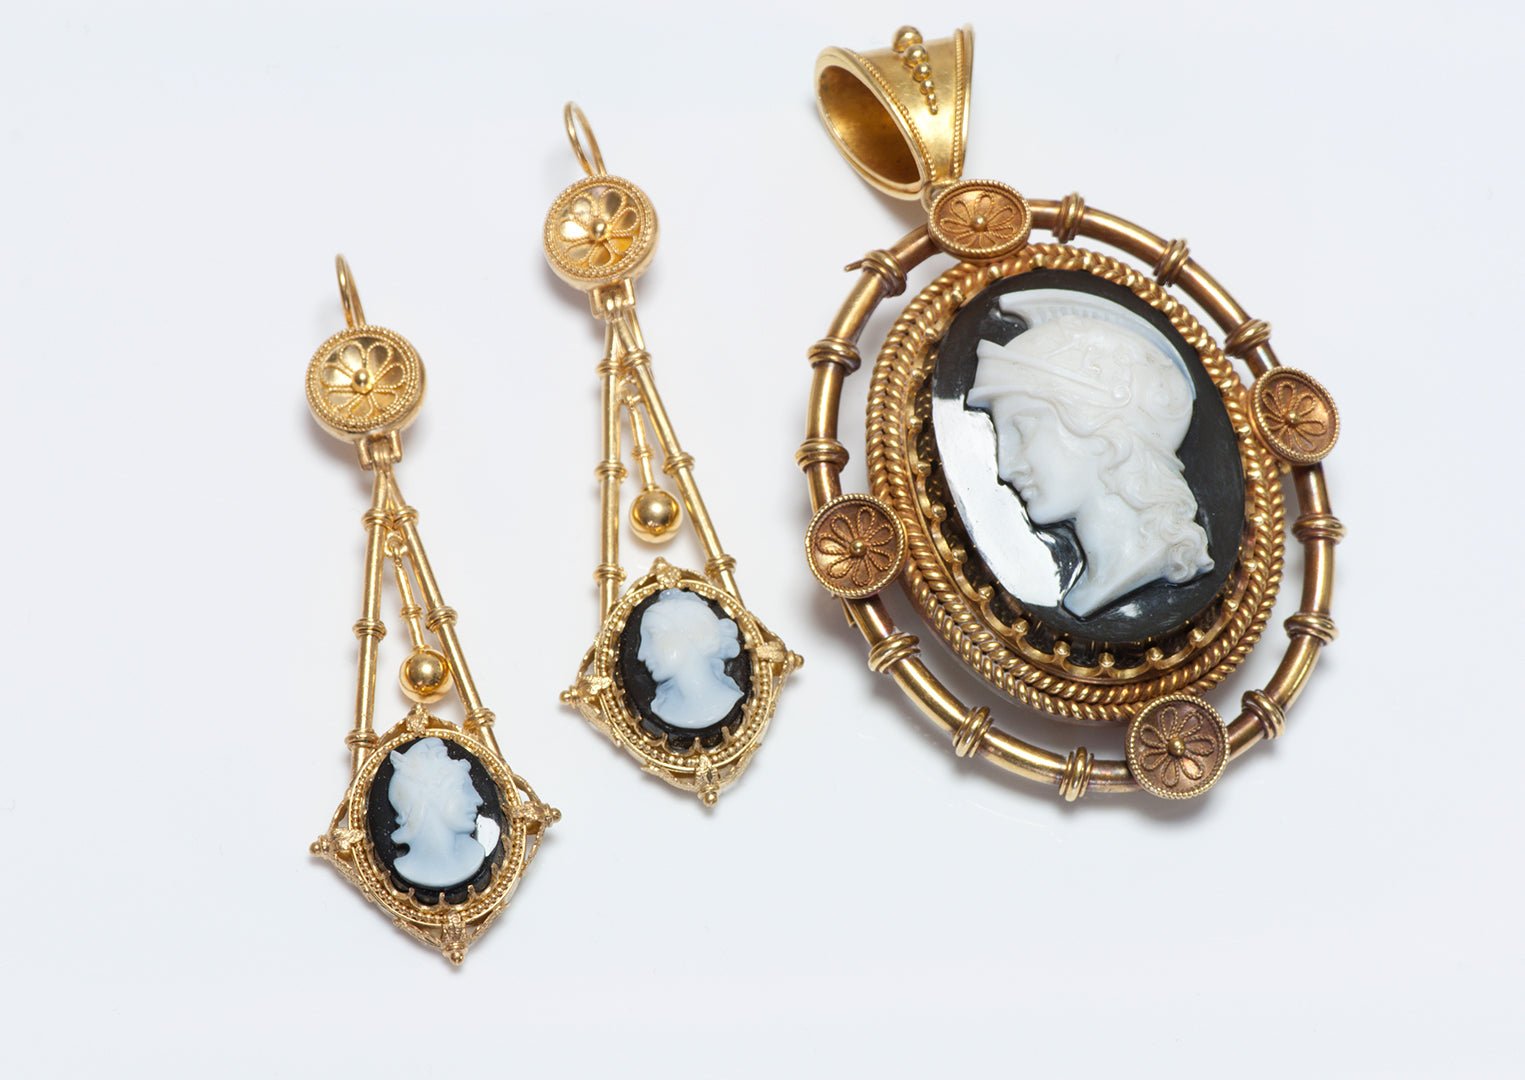 Antique Gold Cameo Earrings & Pendant